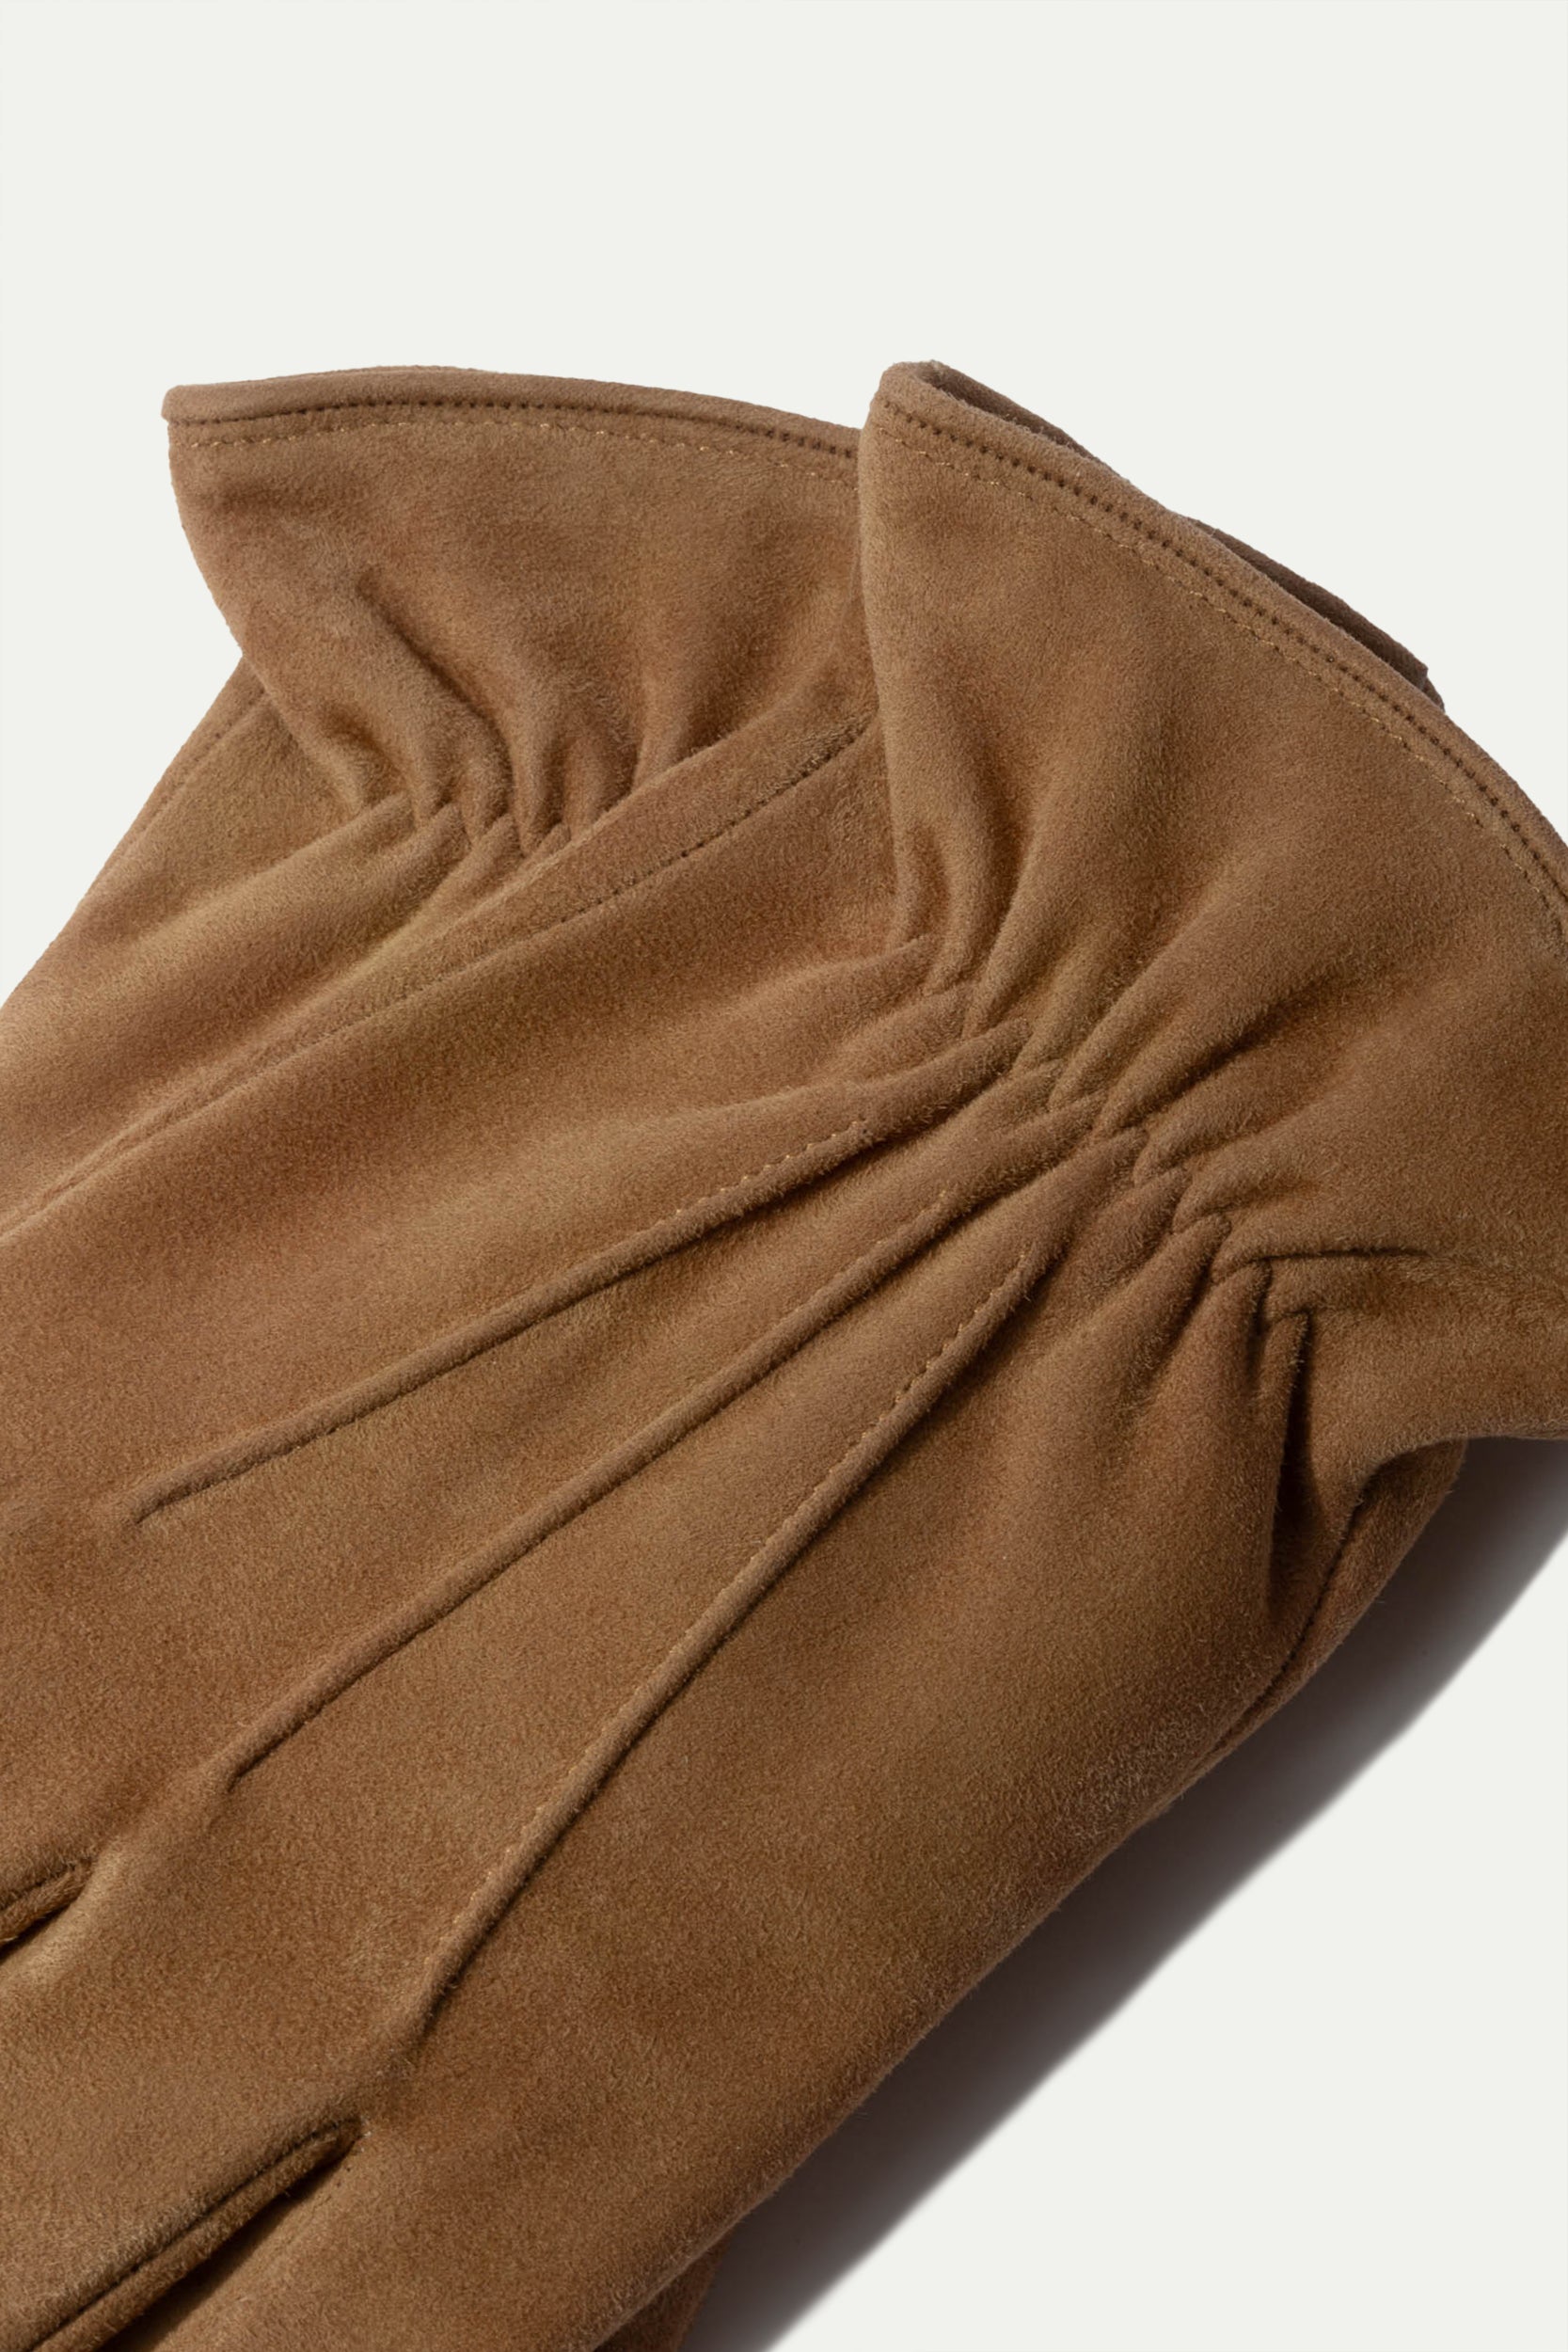 Avana Cashmere Lined Suede Gloves - Made in Italy